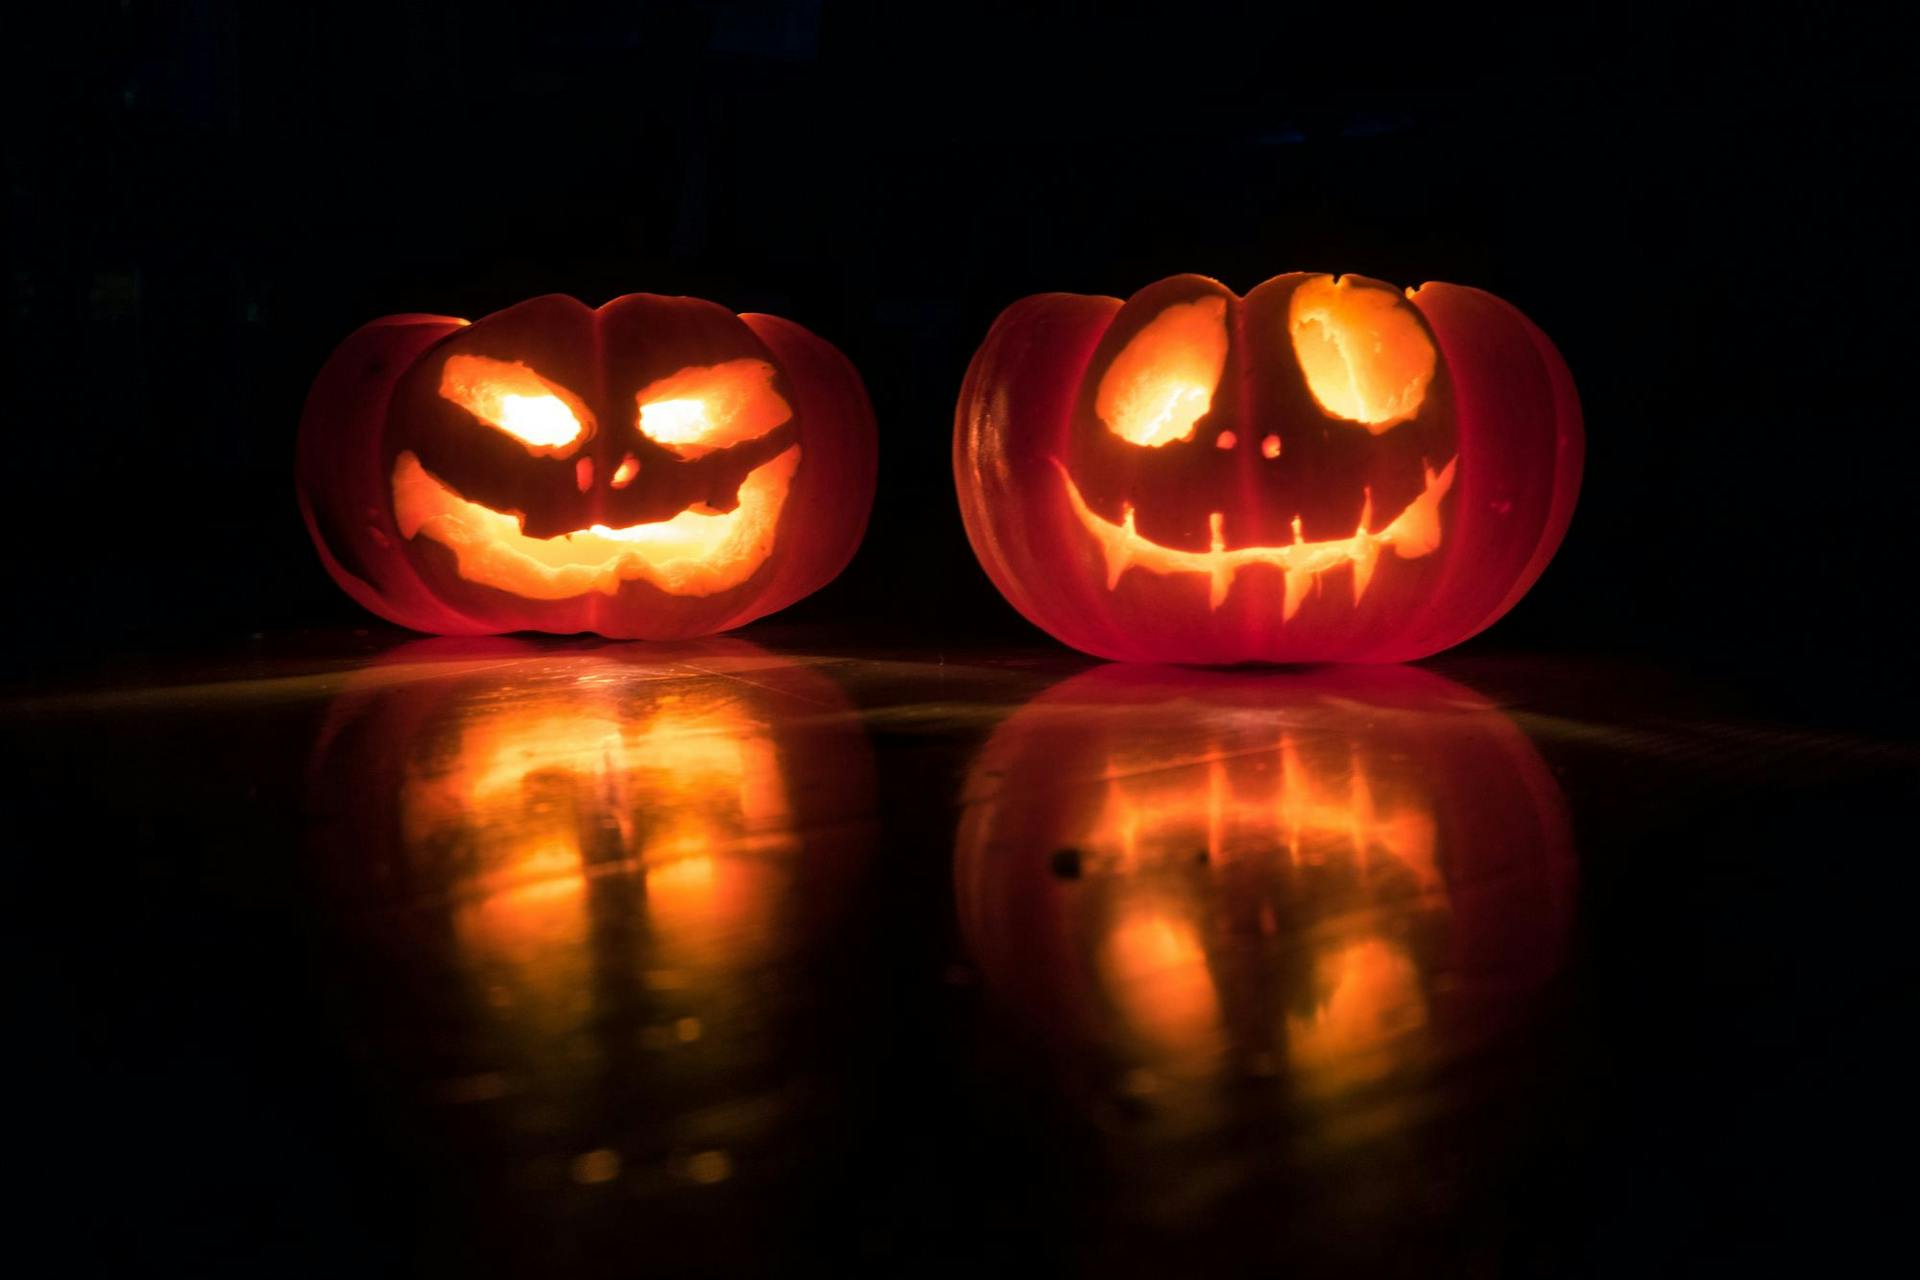 No Brexit Day: a Trick or Treat?